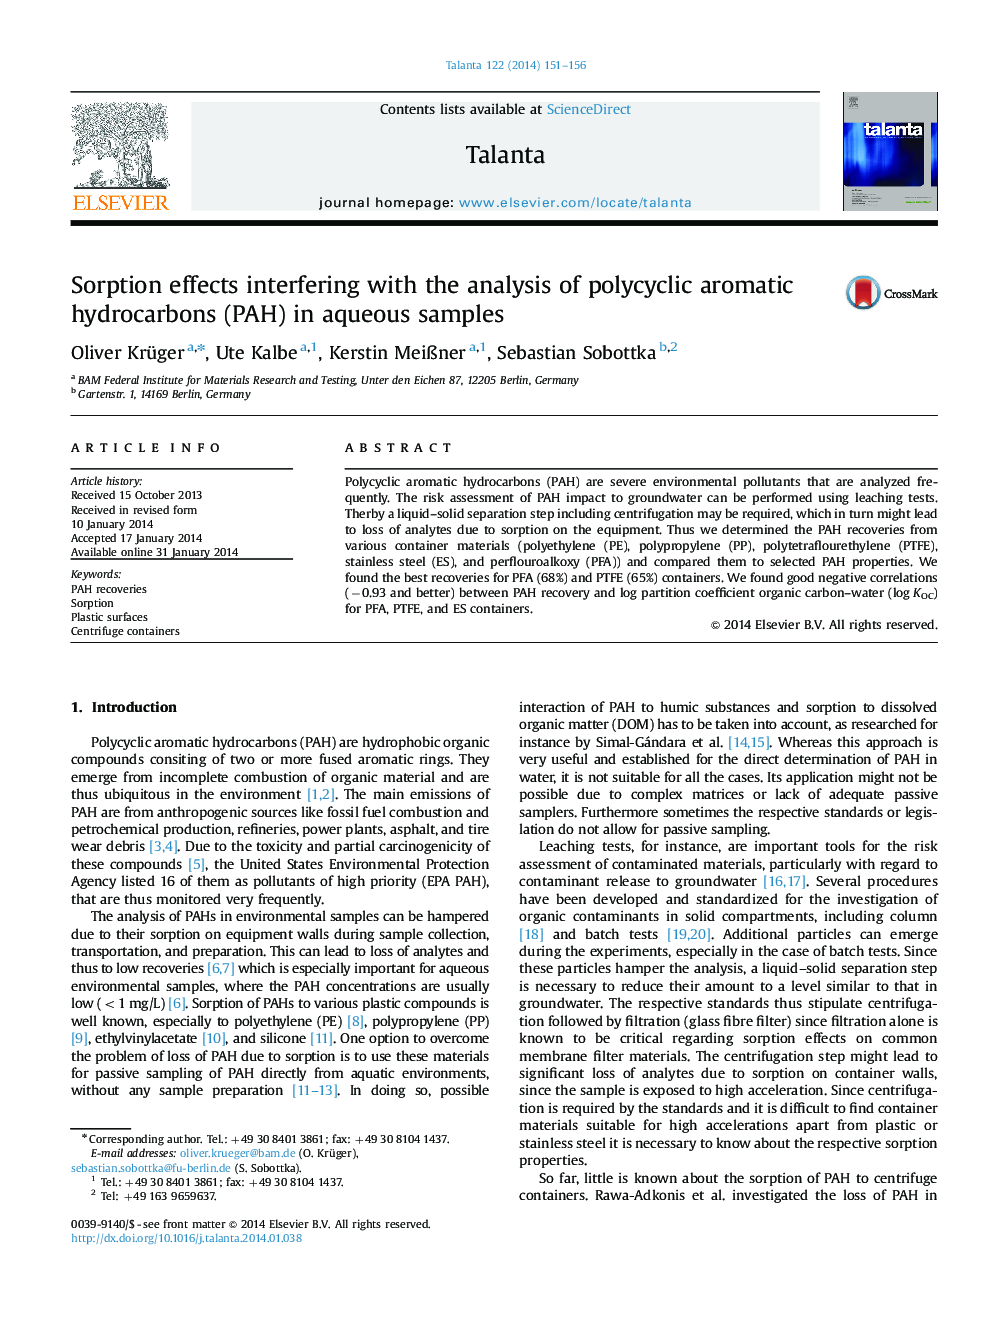 Sorption effects interfering with the analysis of polycyclic aromatic hydrocarbons (PAH) in aqueous samples